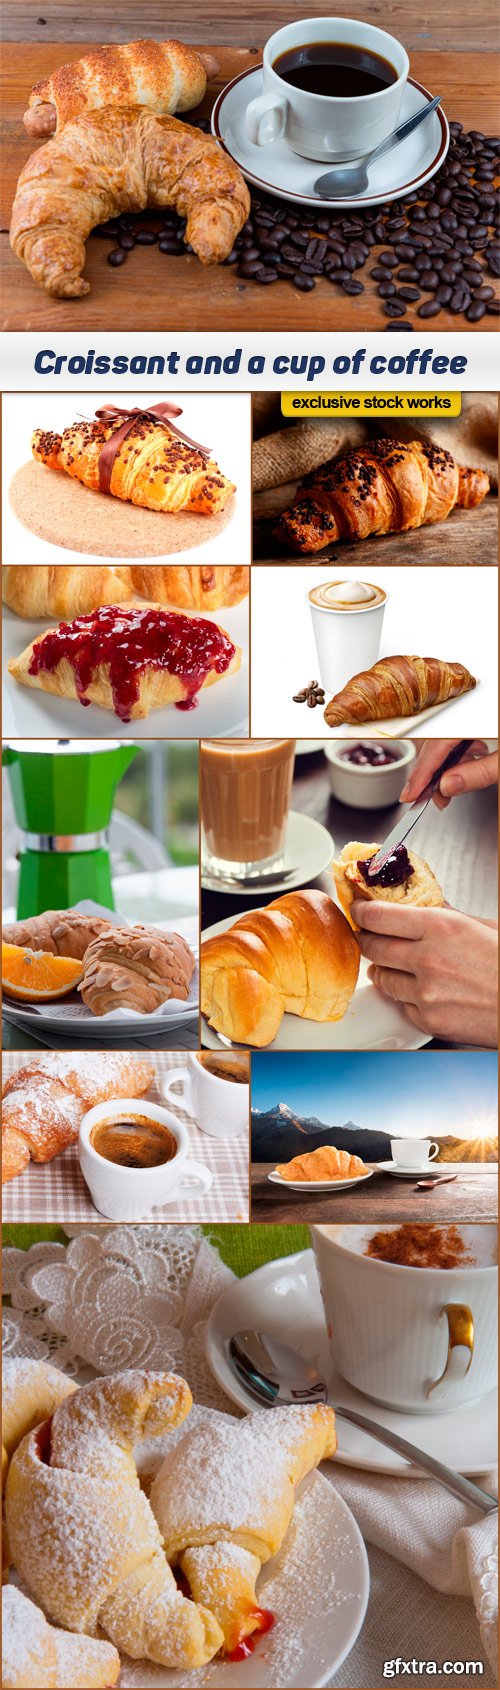 Croissant and a cup of coffee - 10x JPEG